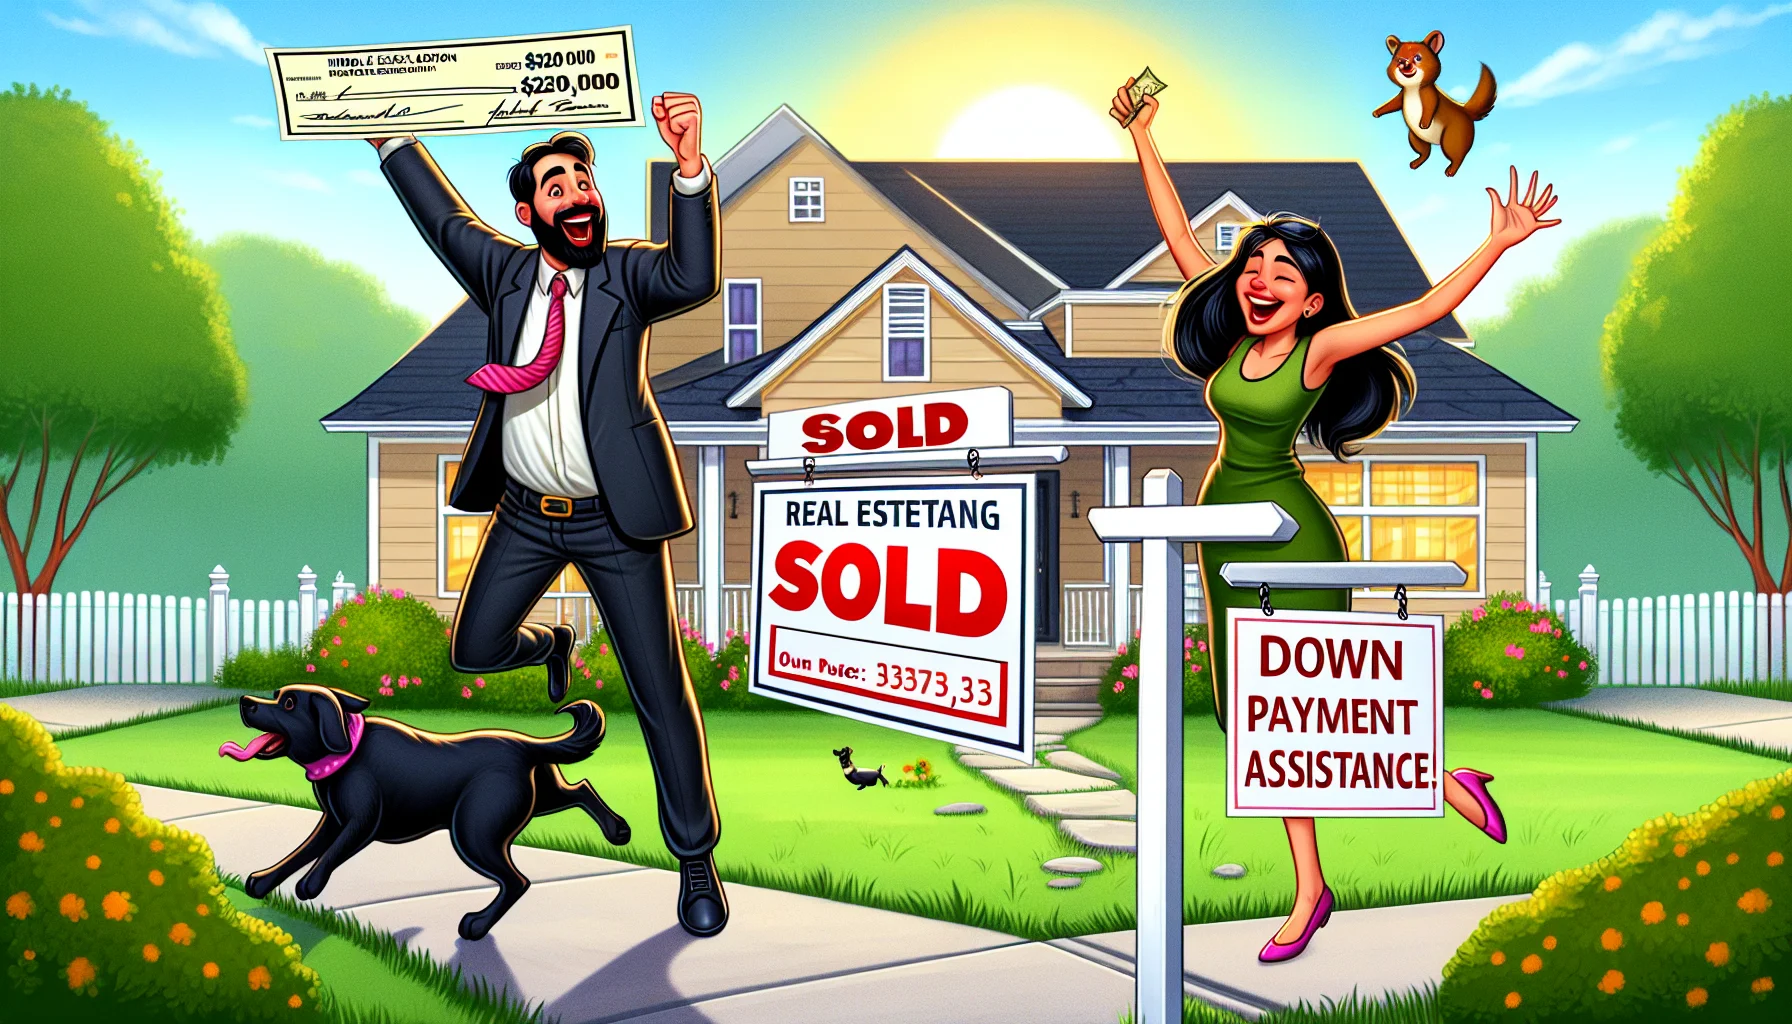 Illustrate a humorous and realistic scenario of the perfect real estate deal. An ecstatic South Asian woman, who is a first-time home buyer, along with a jolly Middle-Eastern real estate agent, prominently displaying a 'Sold' sign in front of a charming suburban house. The home buyer is joyously holding up an oversized check for $20,000 titled 'Down Payment Assistance'. The sun is shining brightly in the sky indicating a perfect day as the lady's black Labrador Retriever playfully chases a squirrel in the well-kept garden.